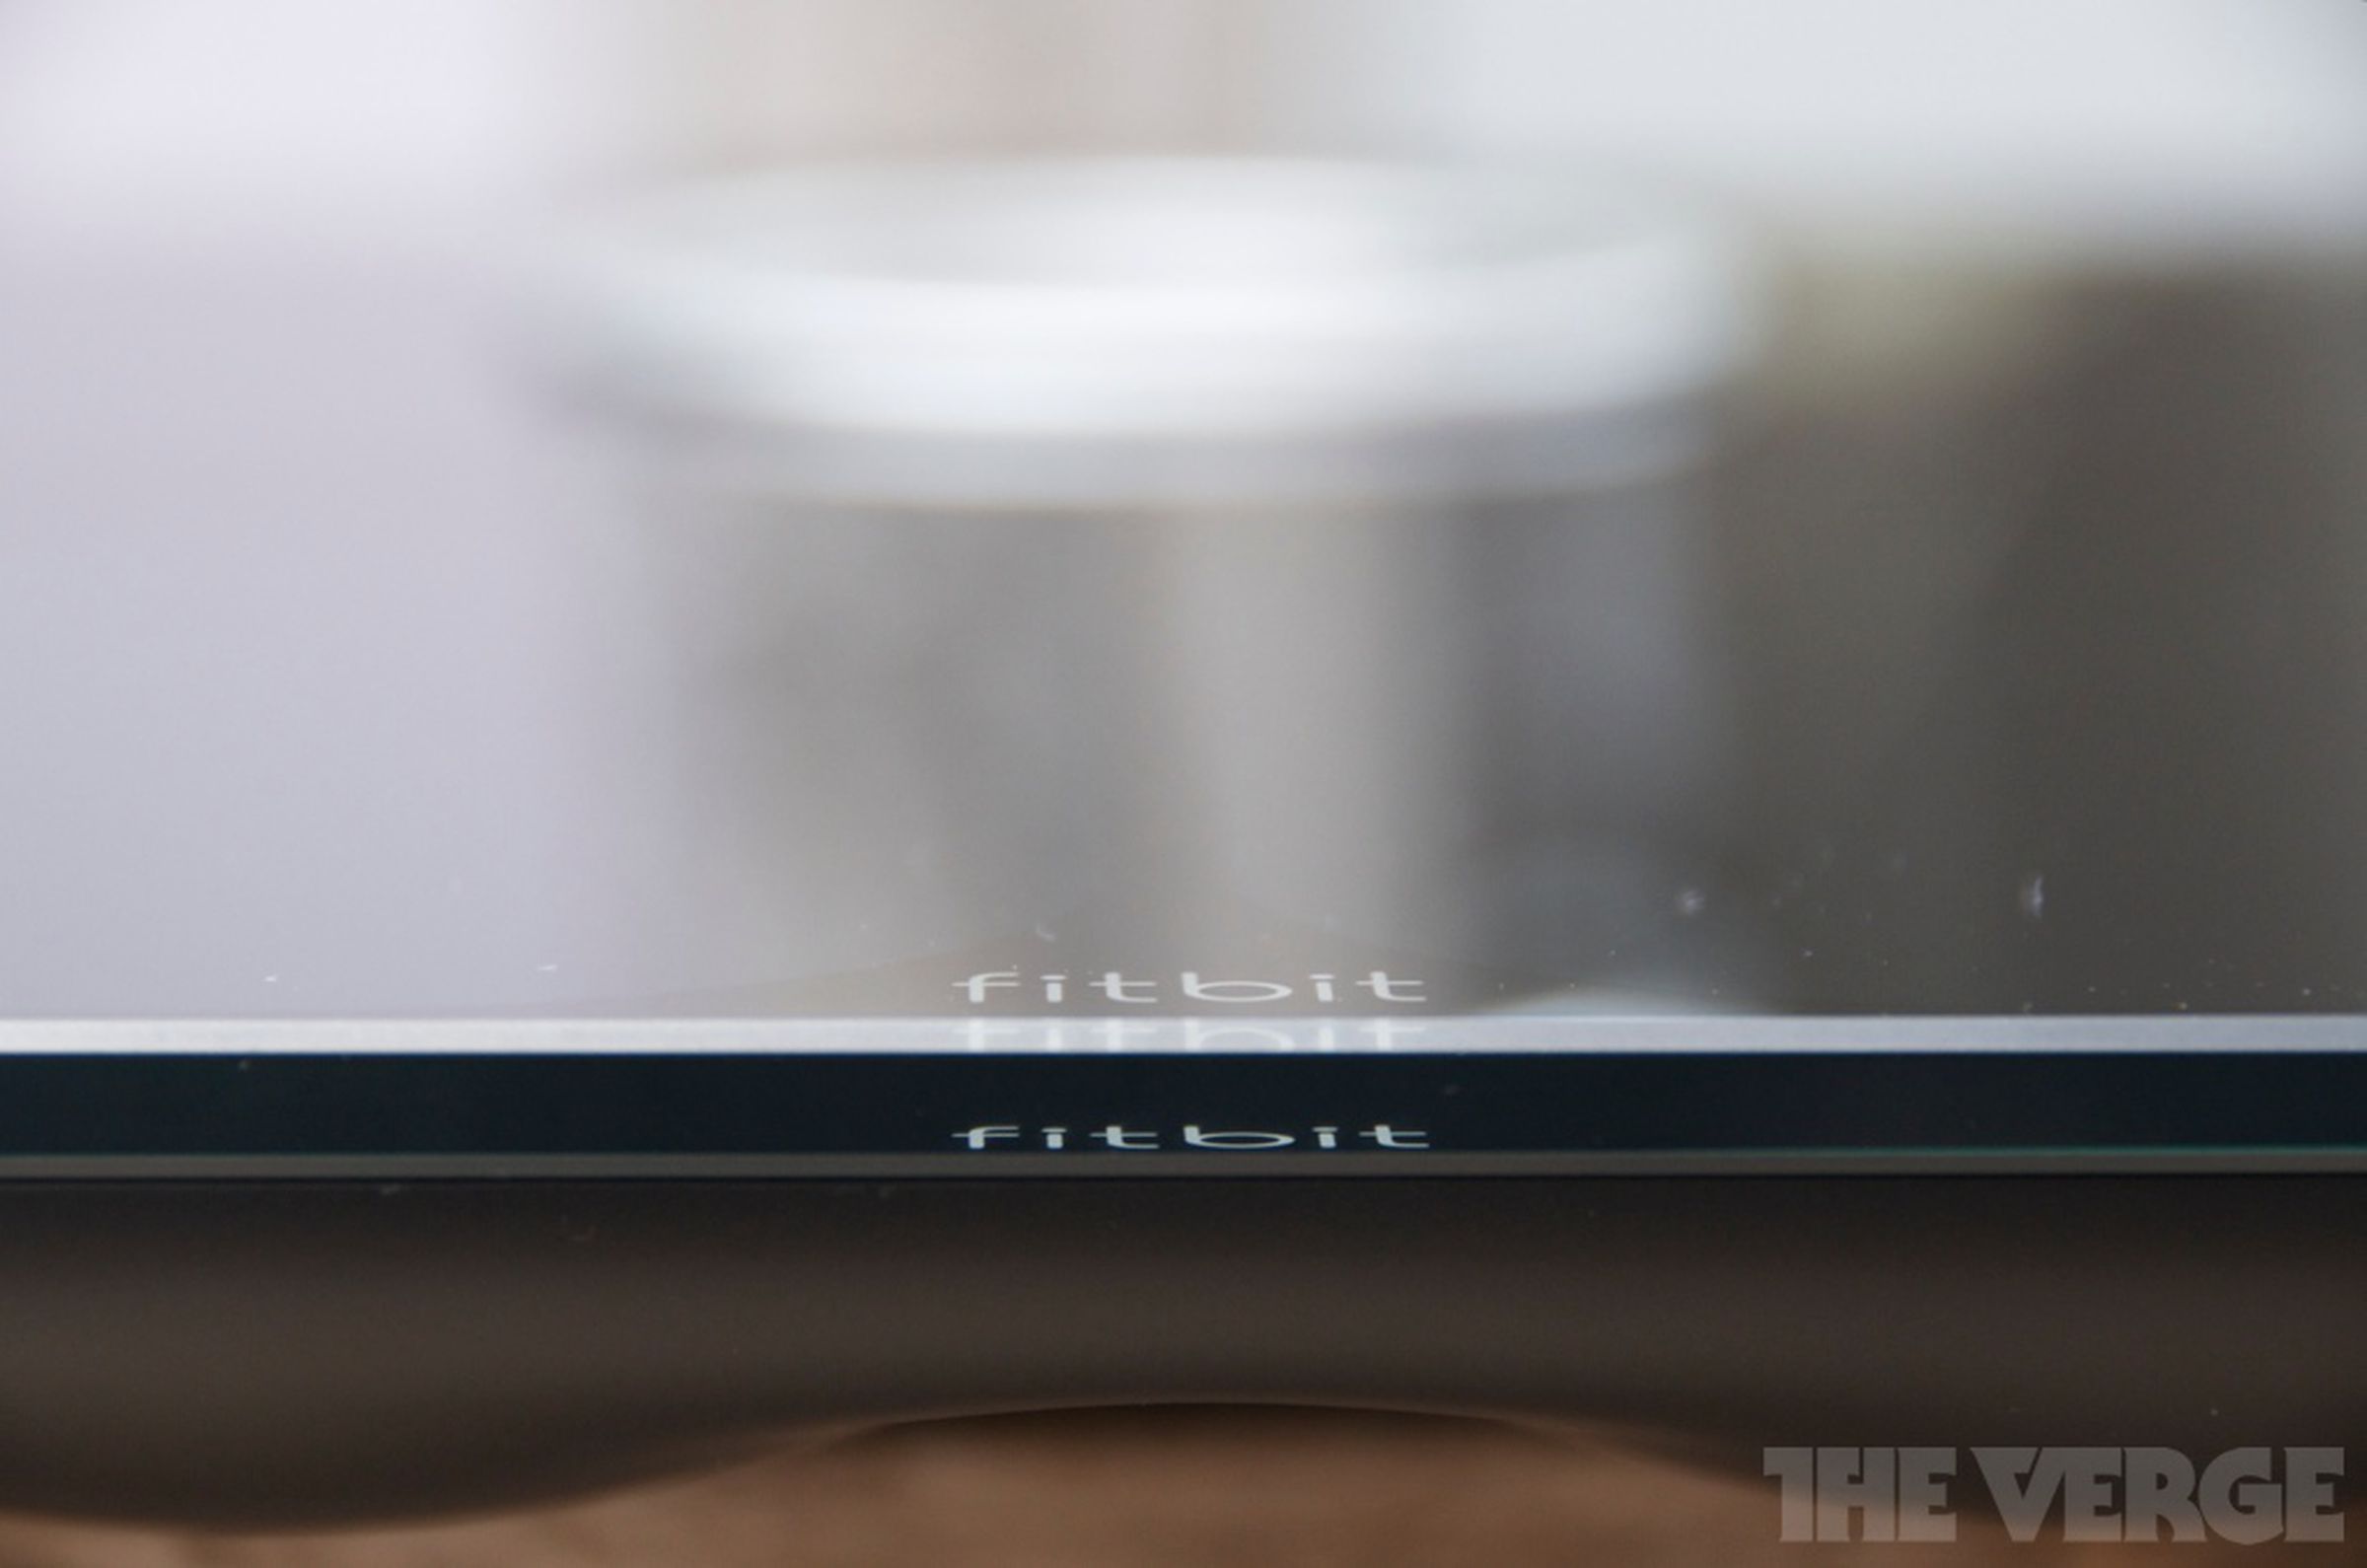 Fitbit Aria Wi-Fi scale review gallery